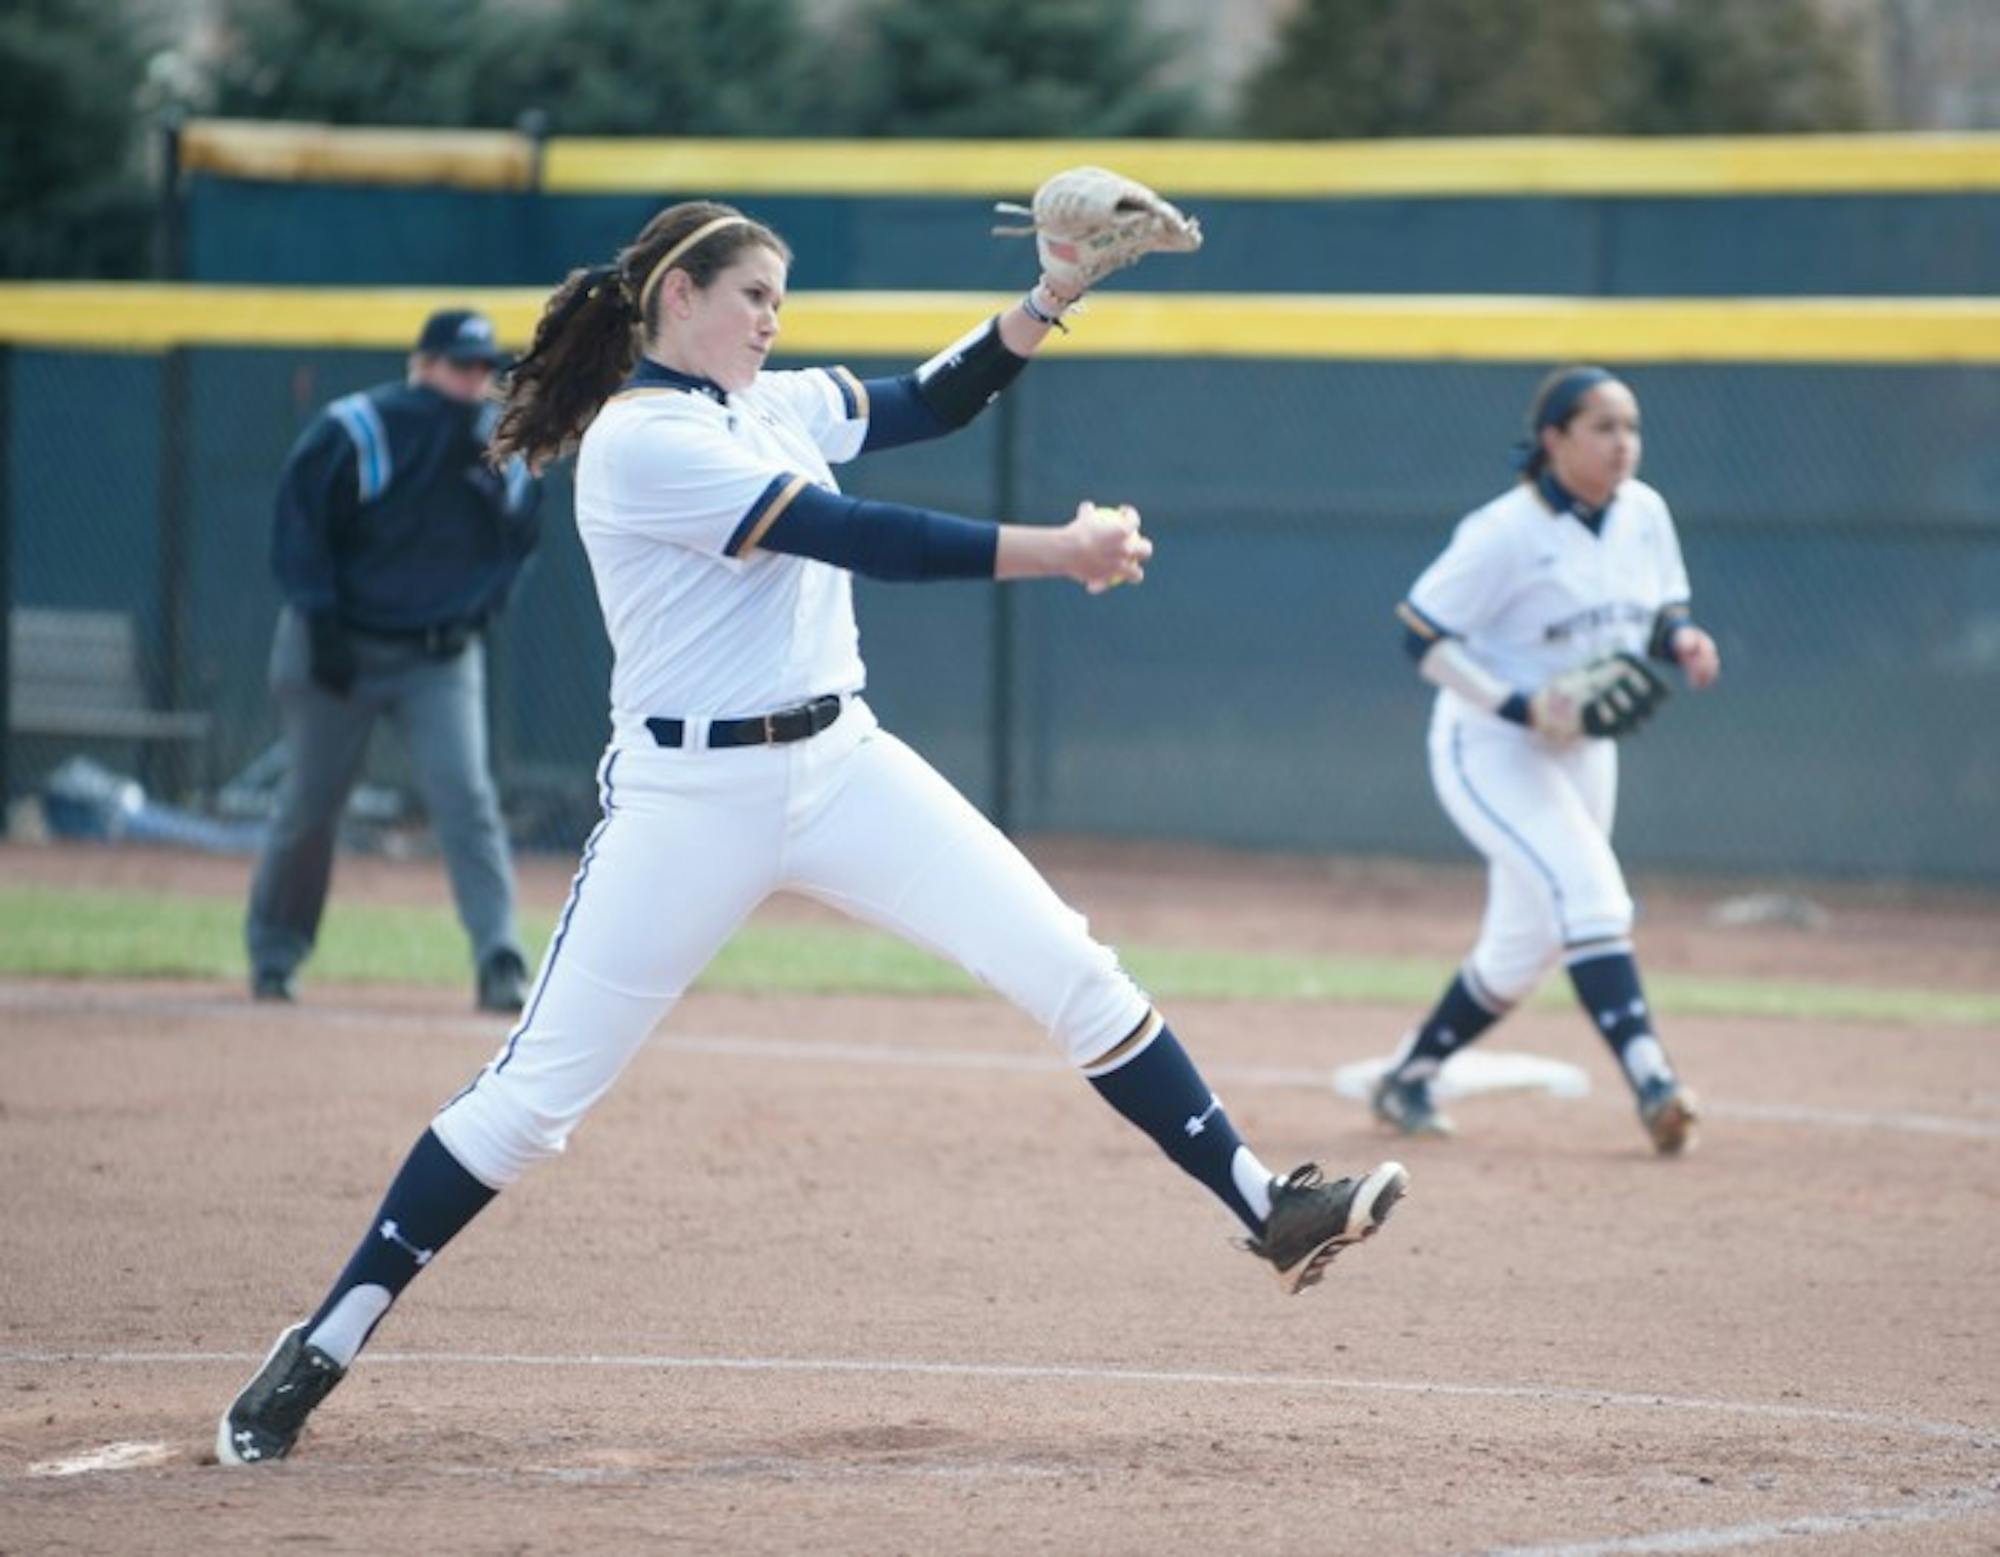 Irish junior Rachel Naslund delivers a pitch during Notre Dame’s 6-1 win over Georgia Tech on March 21 at Melissa Cook Stadium.